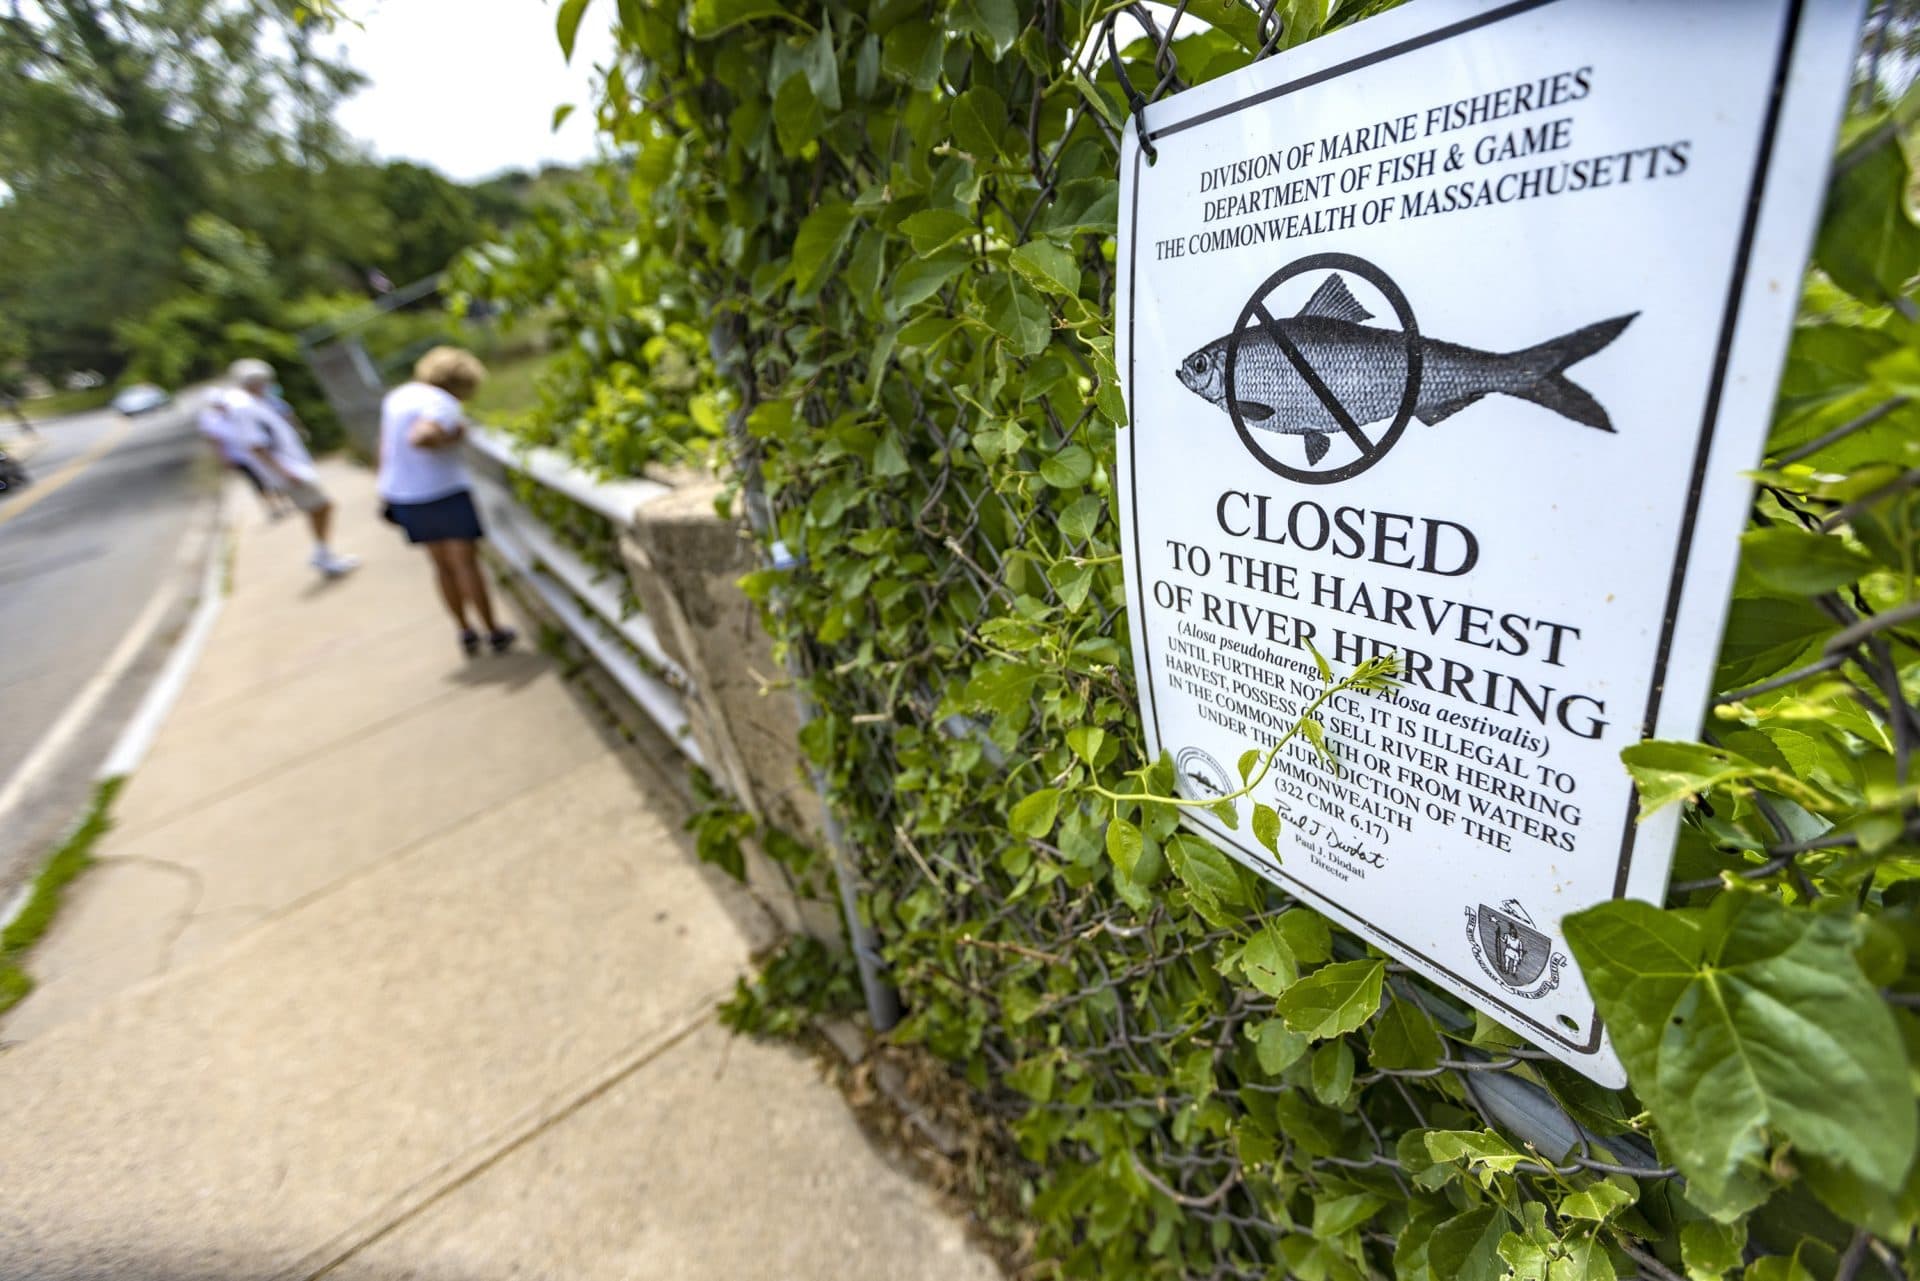 A sign posted at Horn Pond Dam prohibits the harvesting of river herring. (Jesse Costa/WBUR)